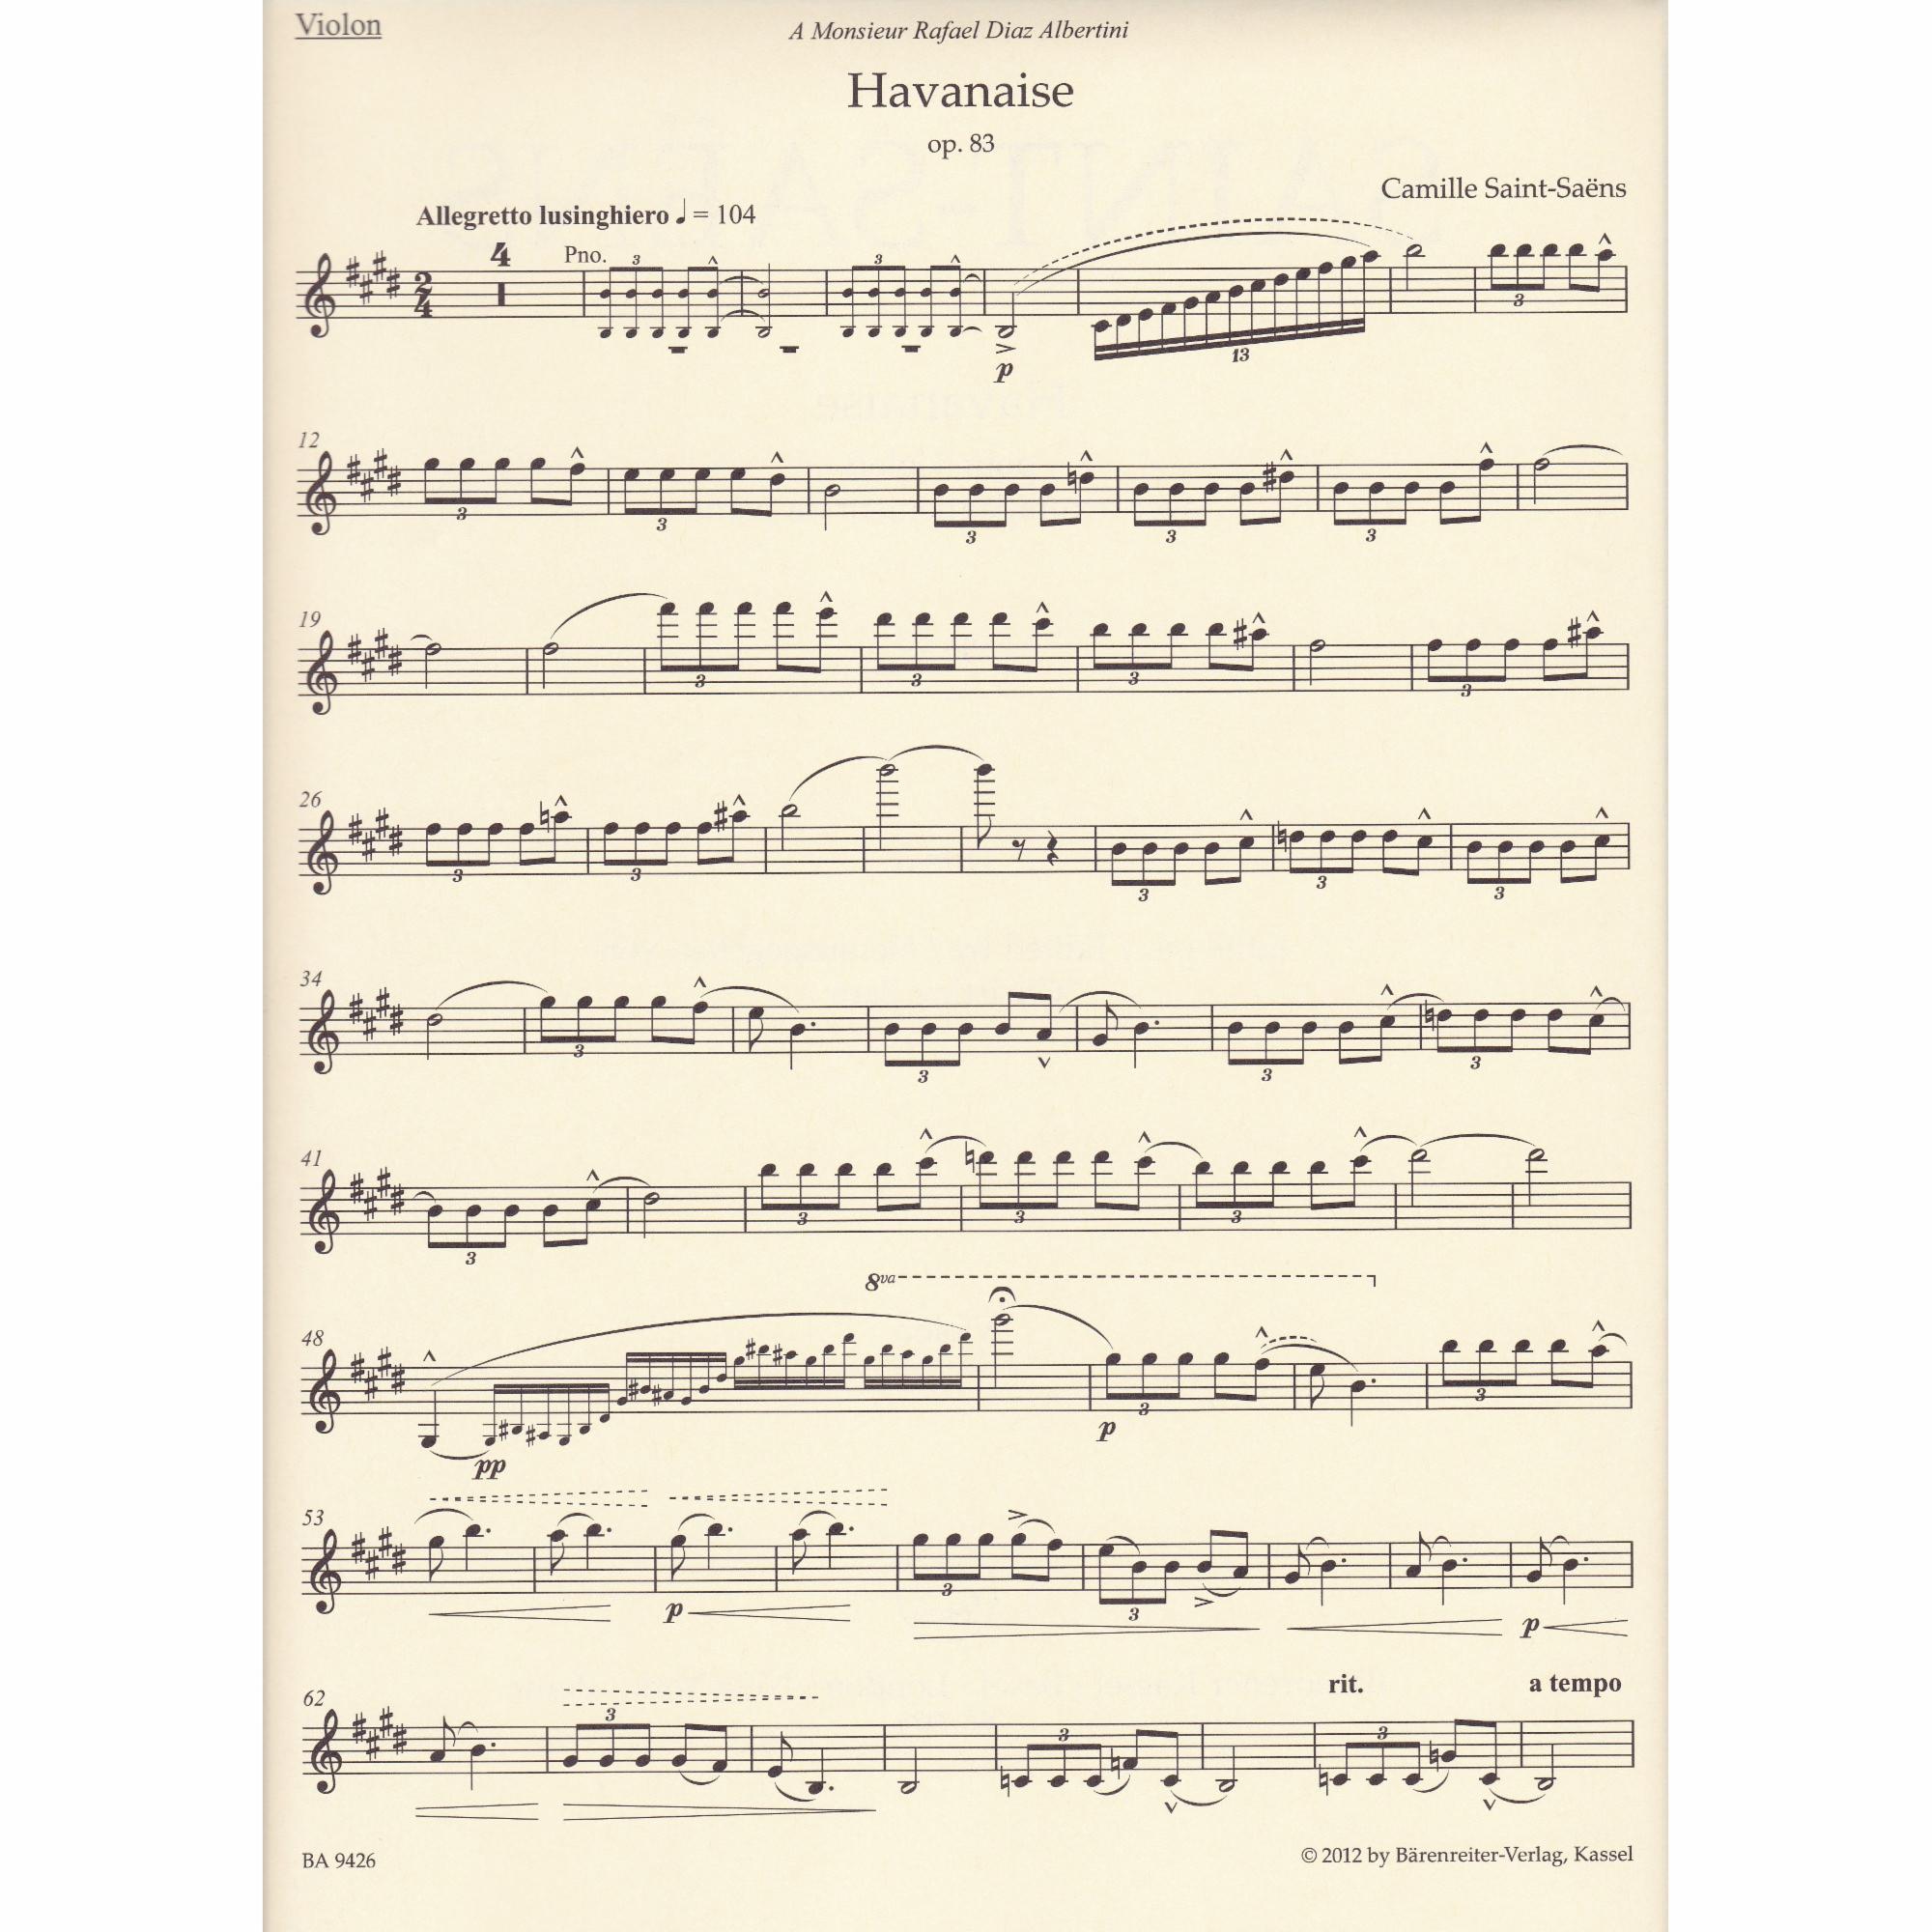 Havanaise for Violin and Piano, Op. 83